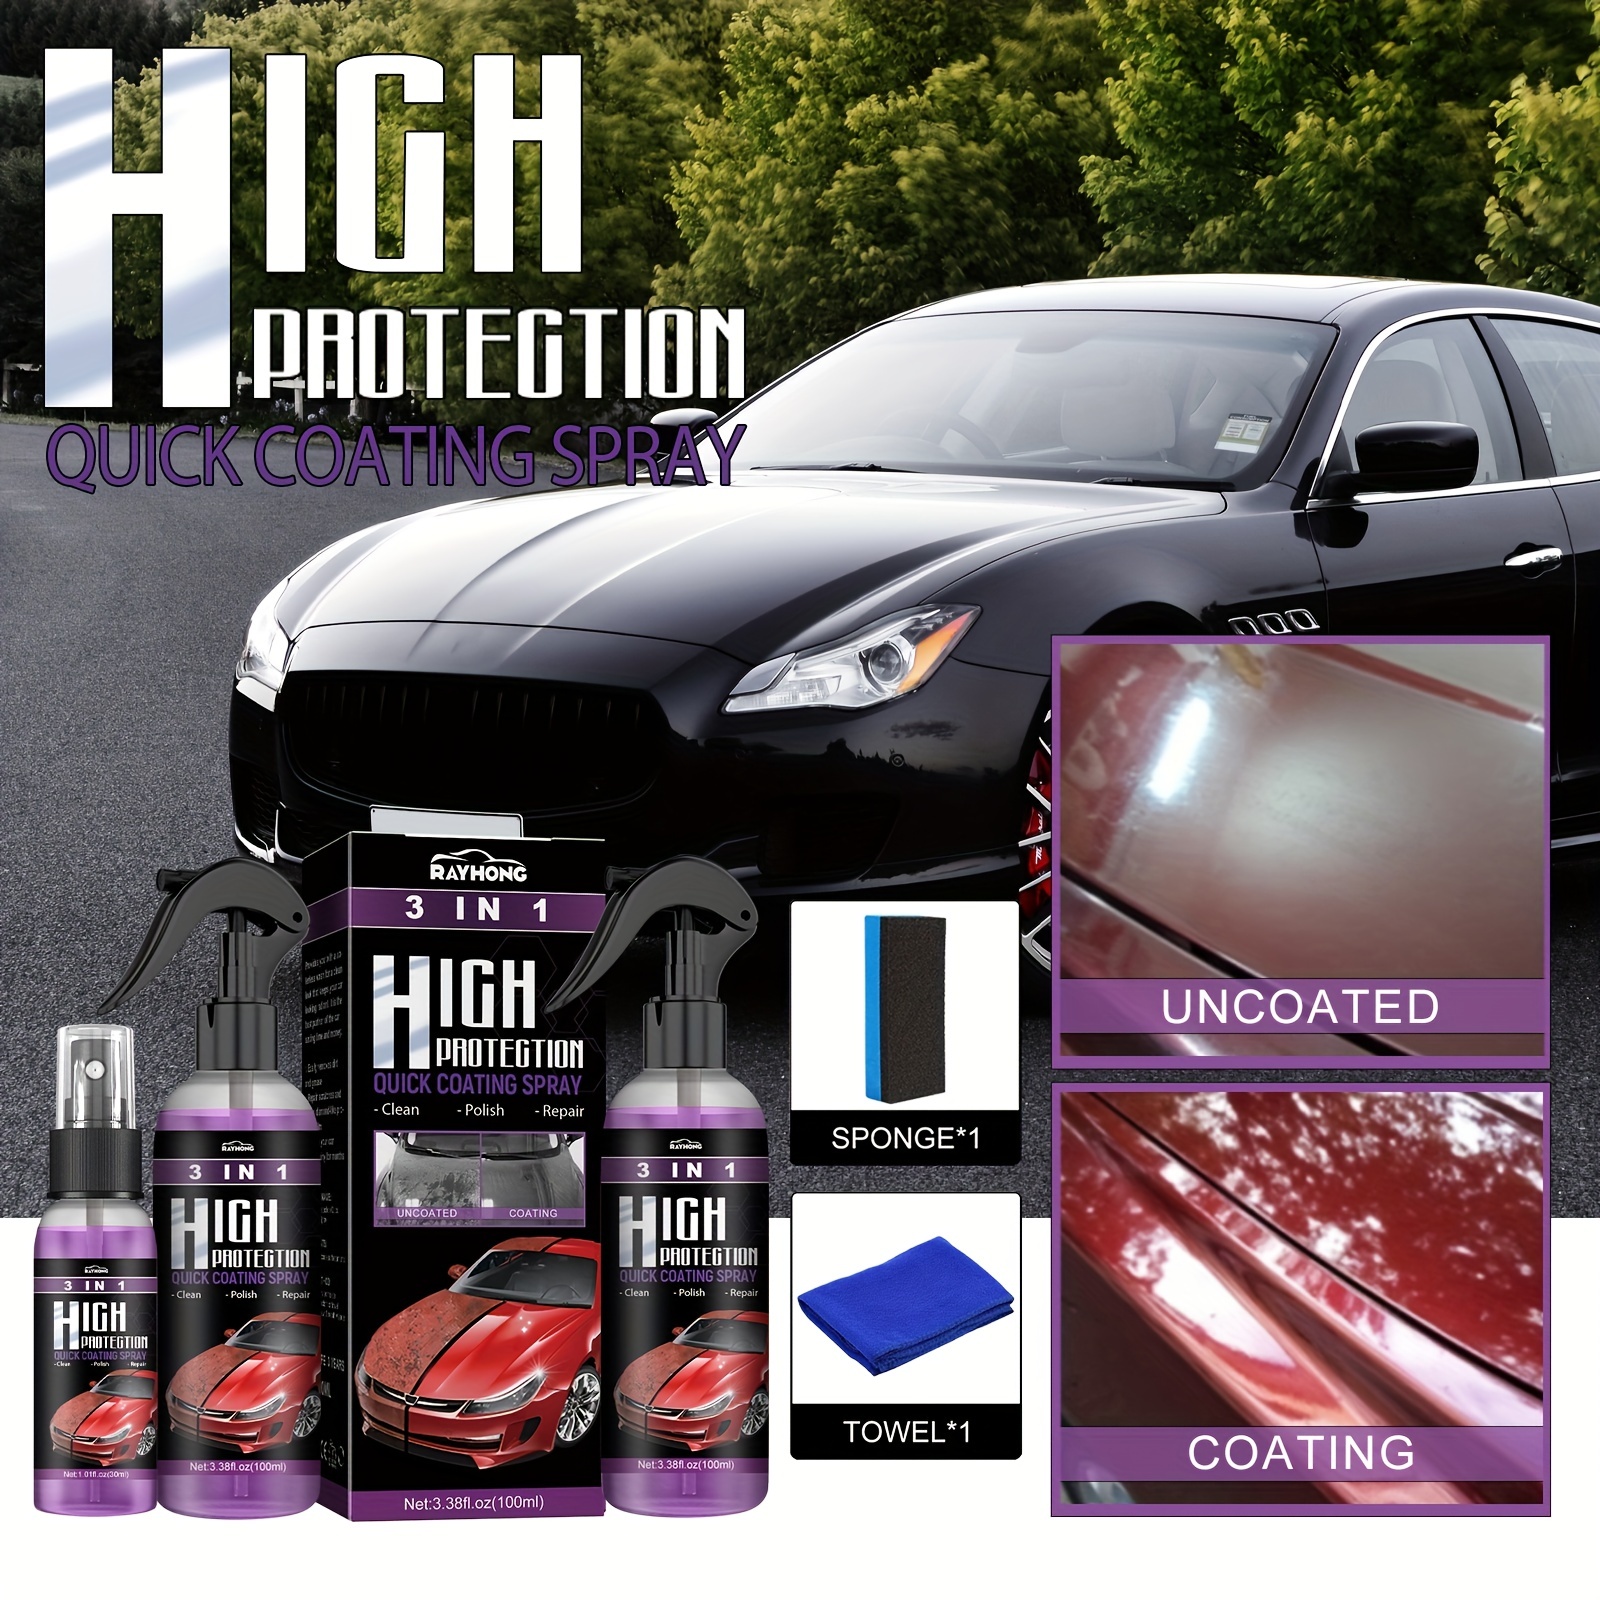 3 in 1 High Protection Car Coating Spray Polishing Spray Set 120ml Ceramic Car  Coating Spray Paint Car Cleaning Maintenance Kit - AliExpress